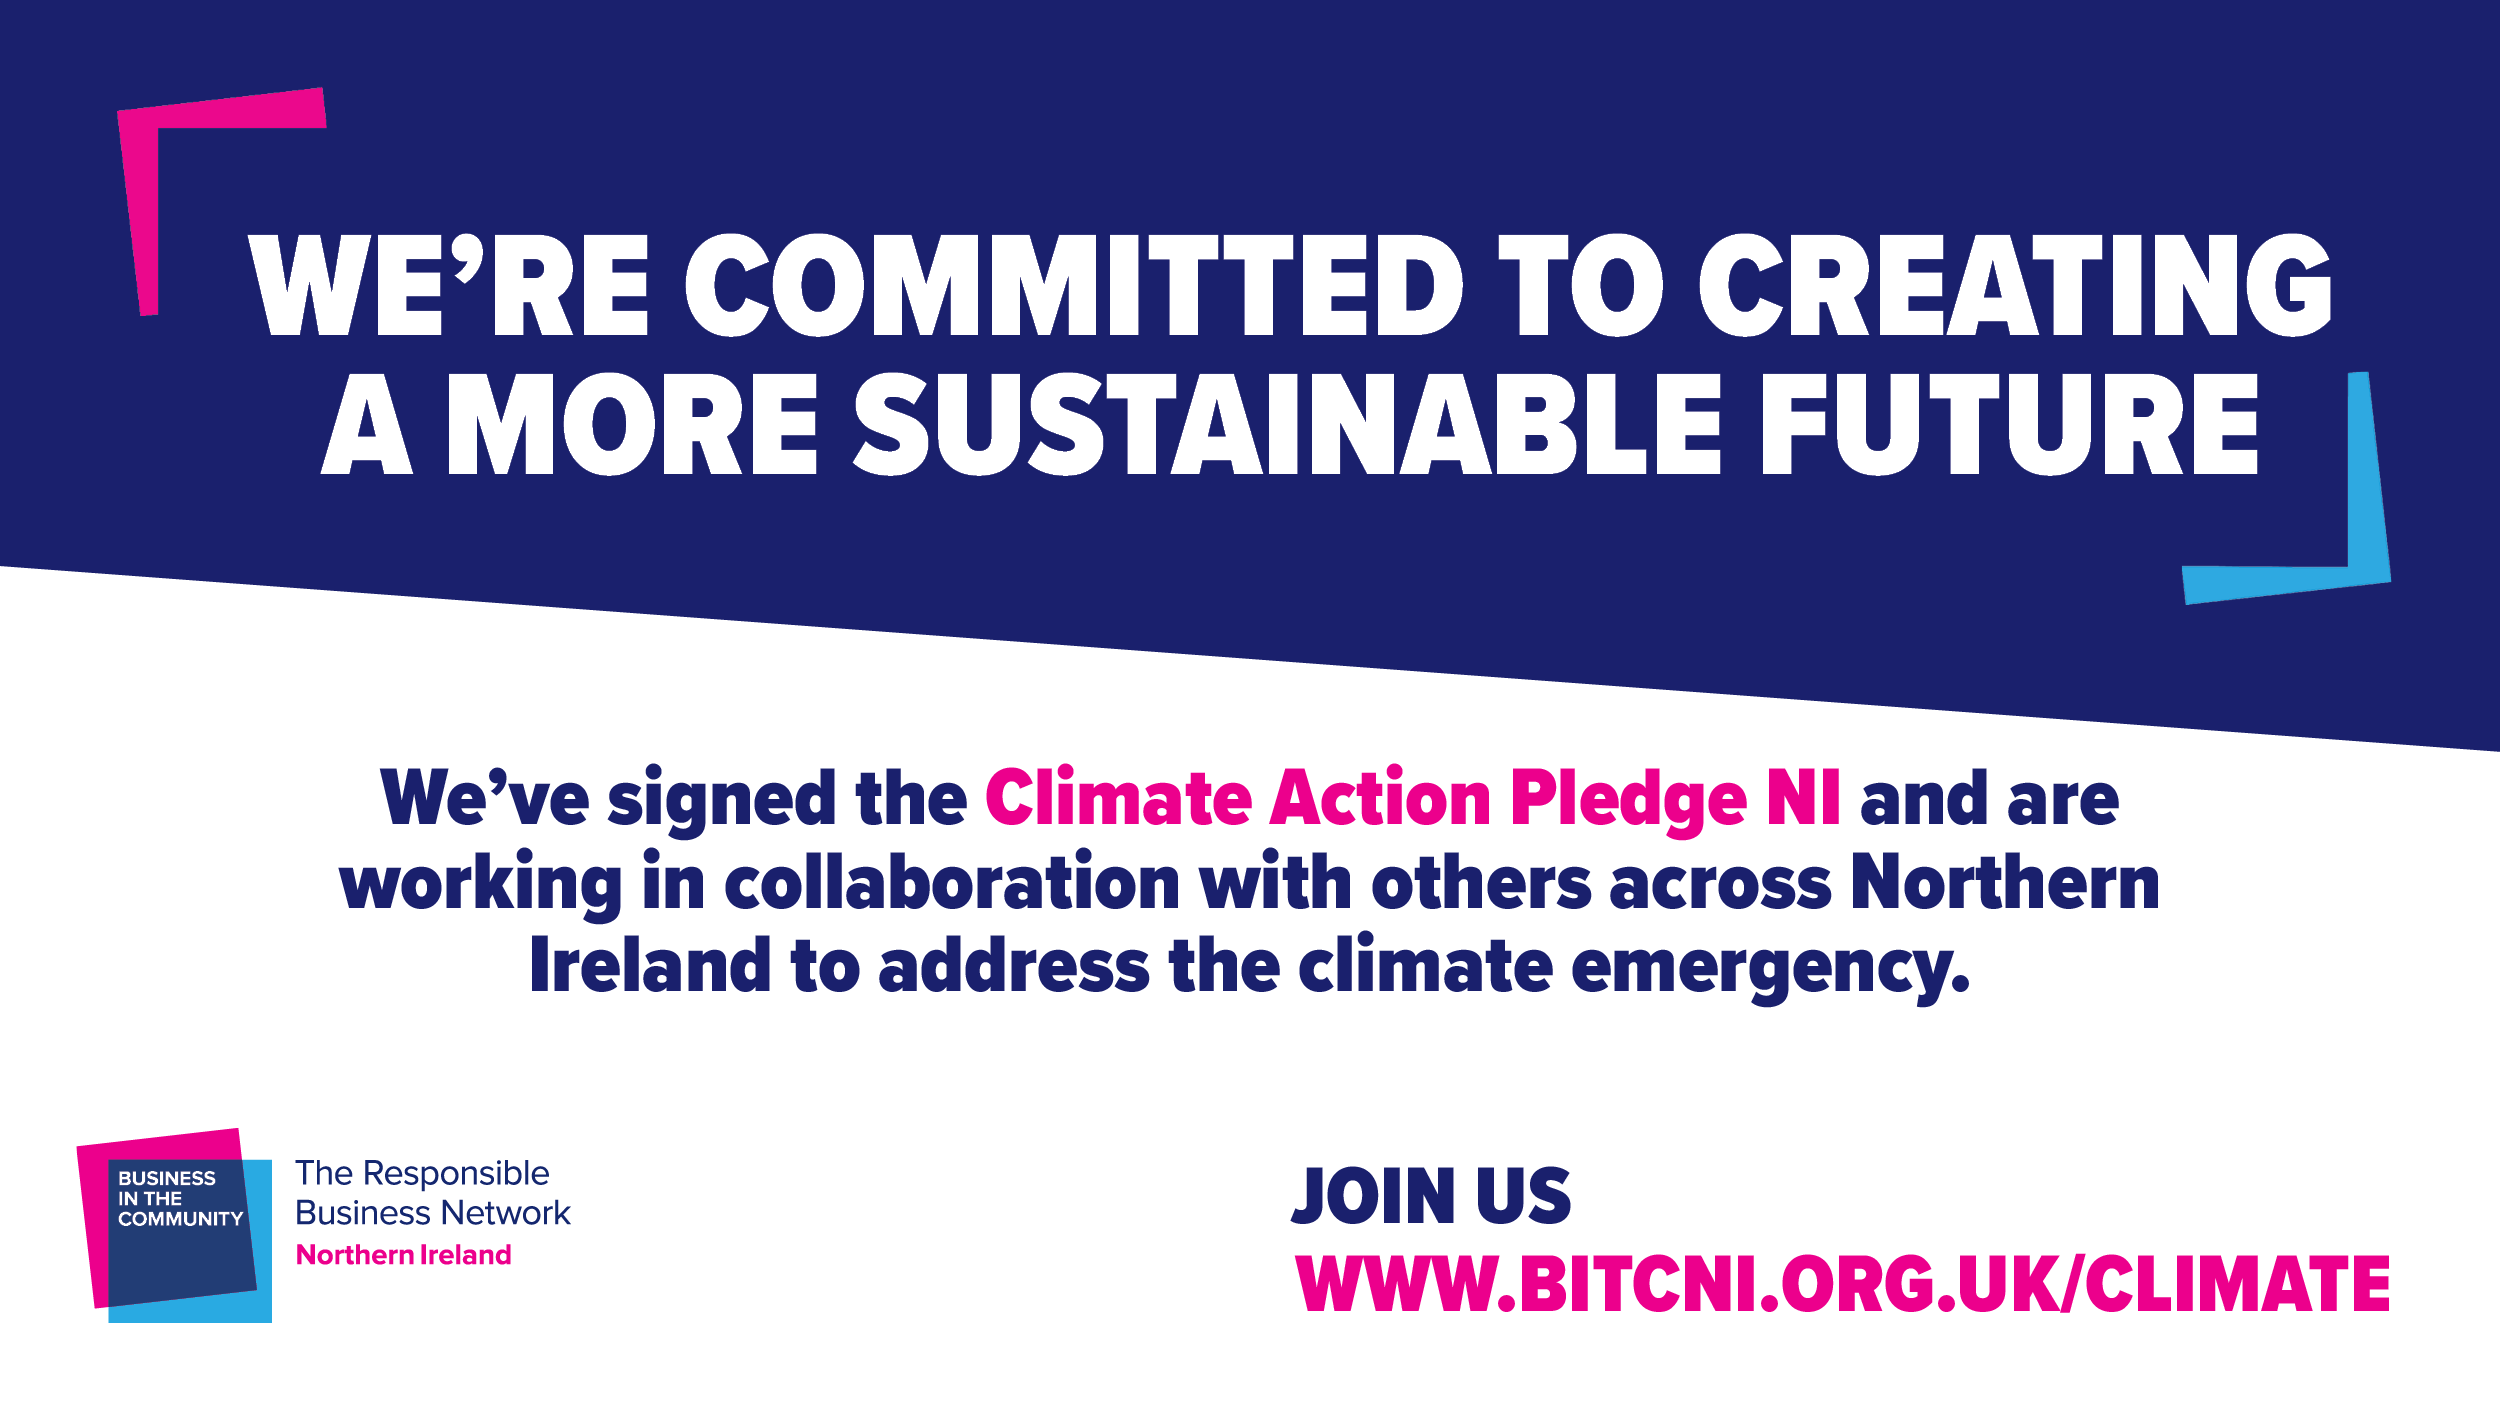 Honeycomb Jobs signs the Climate Action Pledge